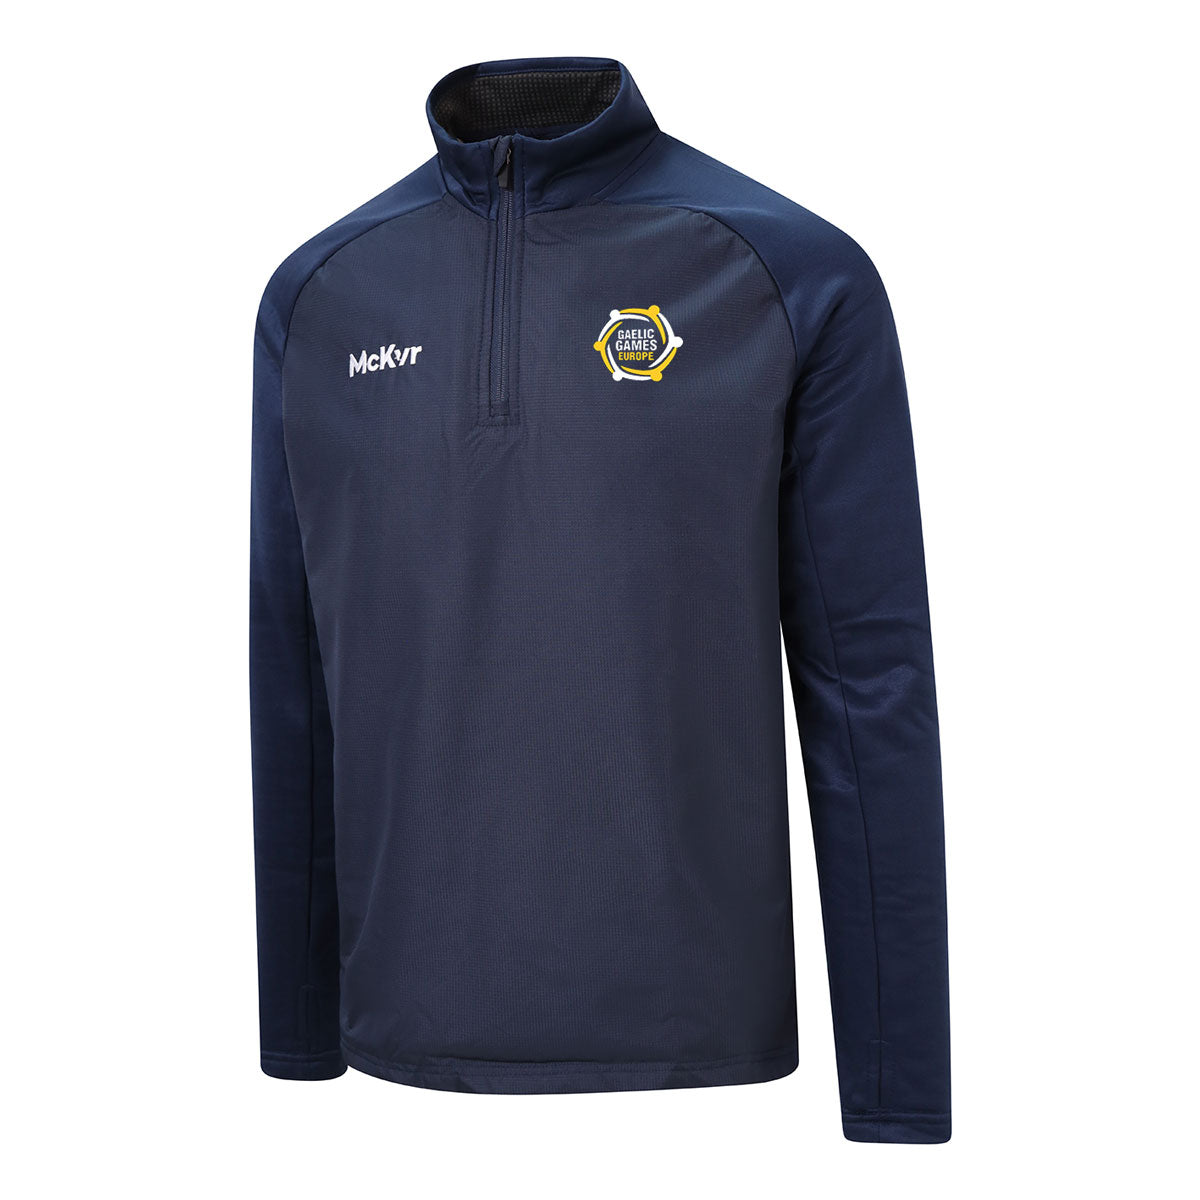 Mc Keever Gaelic Games Europe Core 22 Warm Top - Adult - Navy